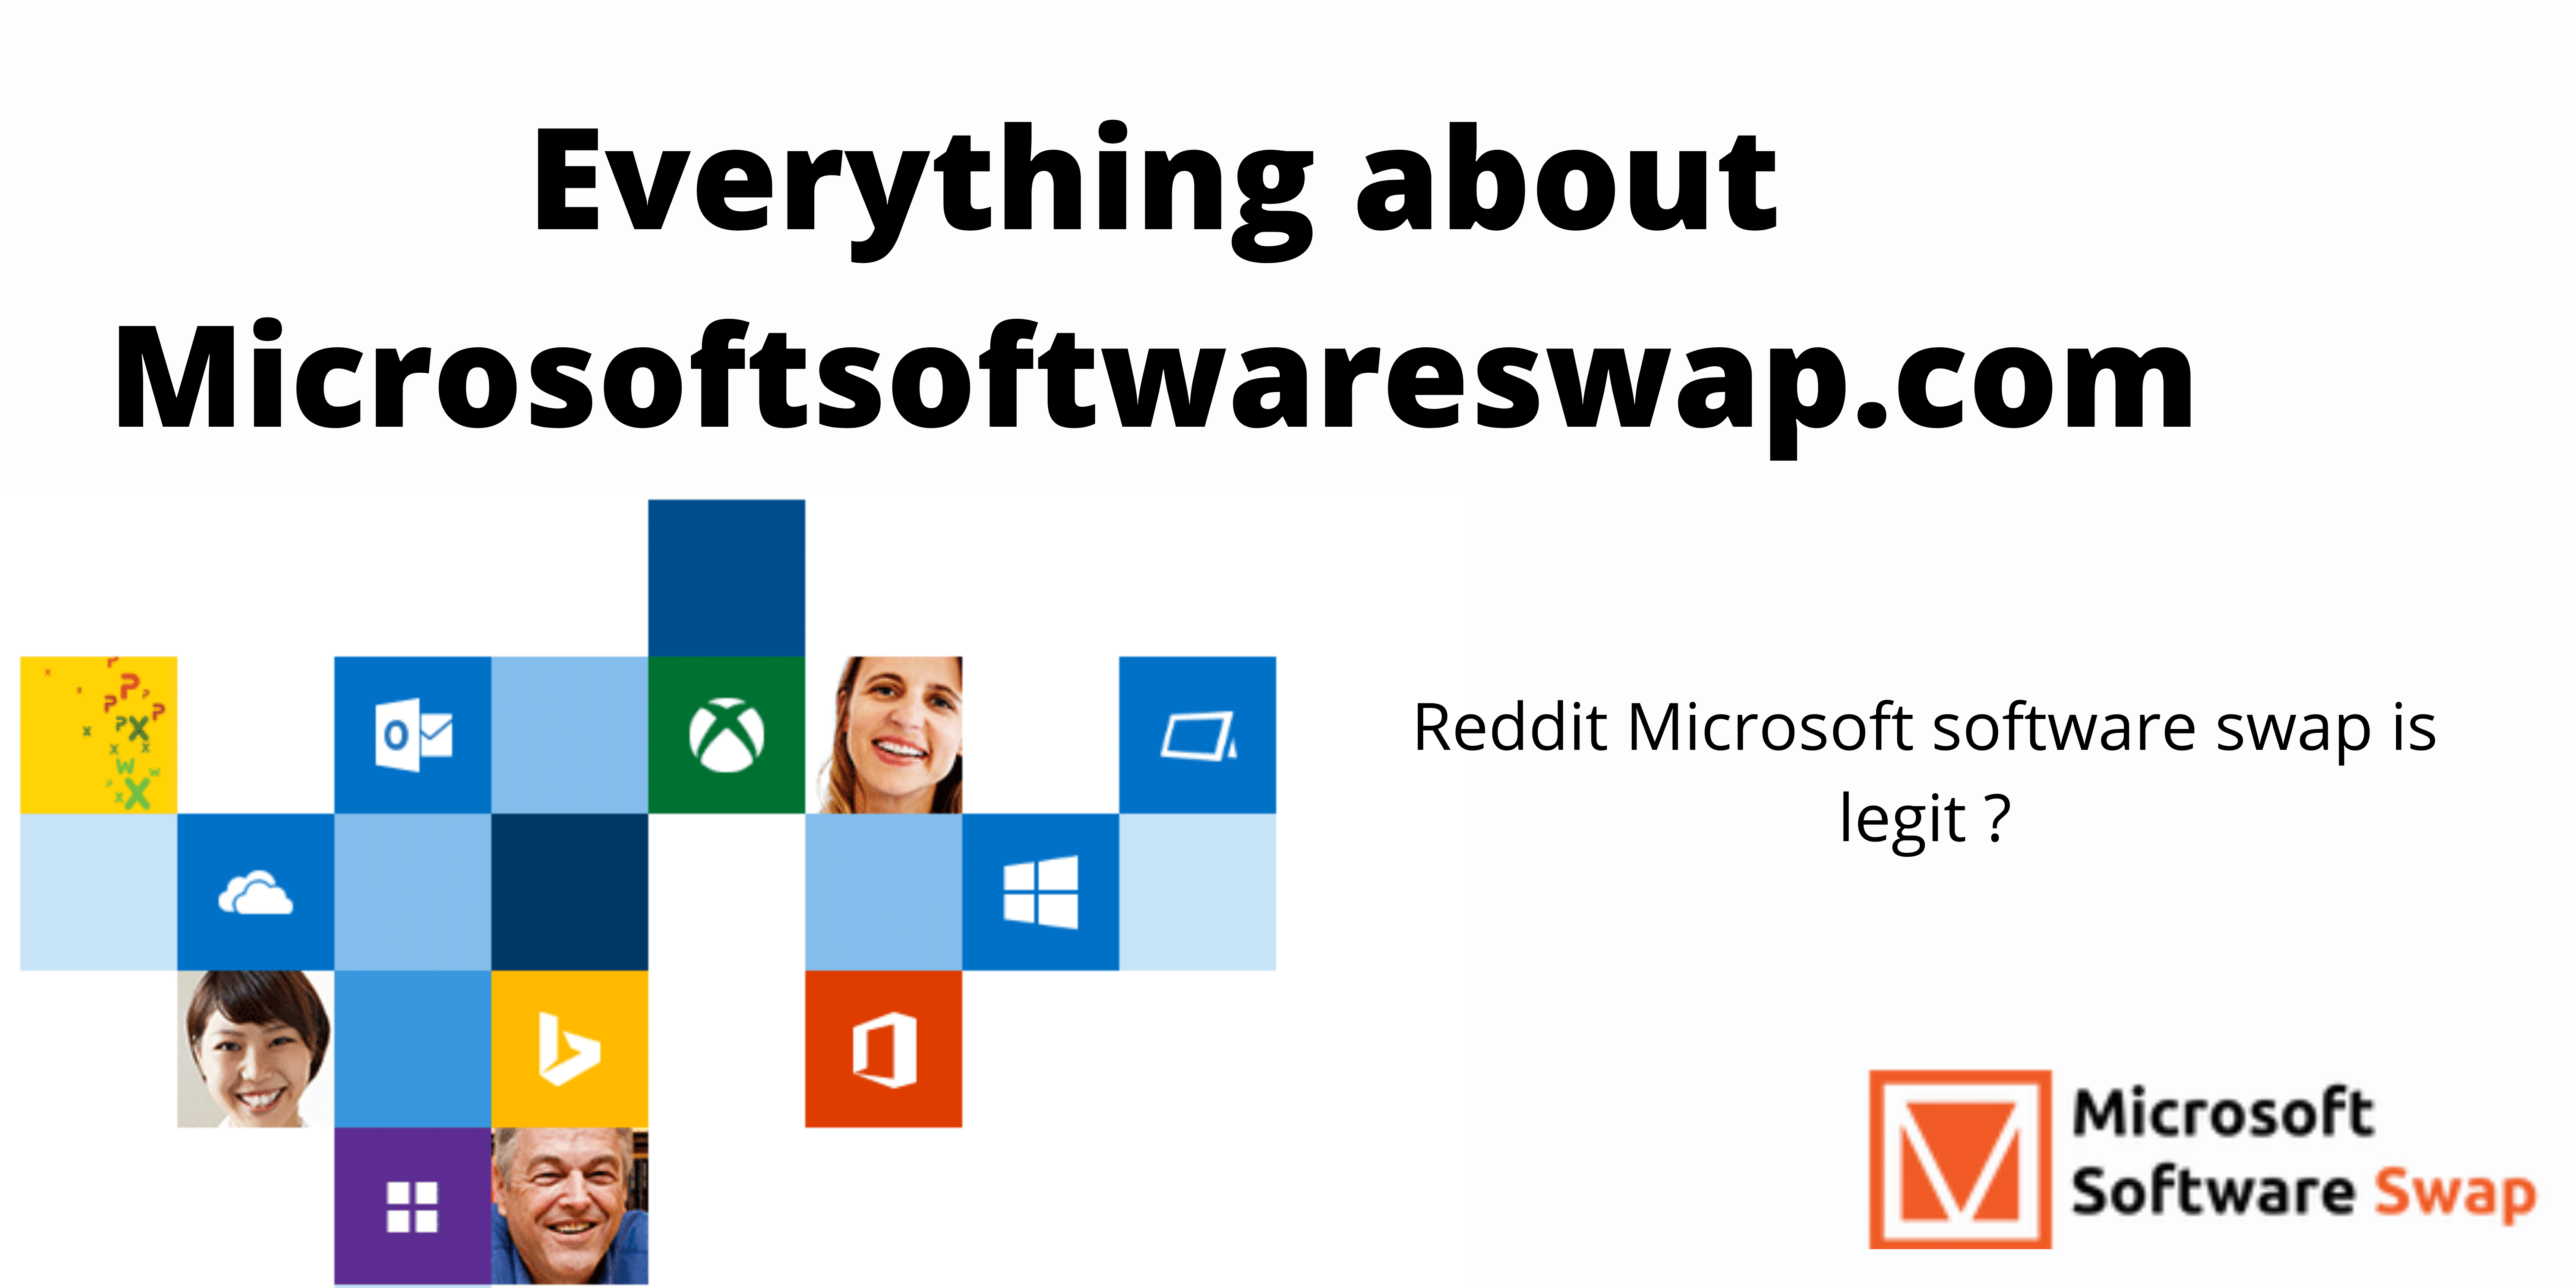 Learn More About Microsoft Software Swap